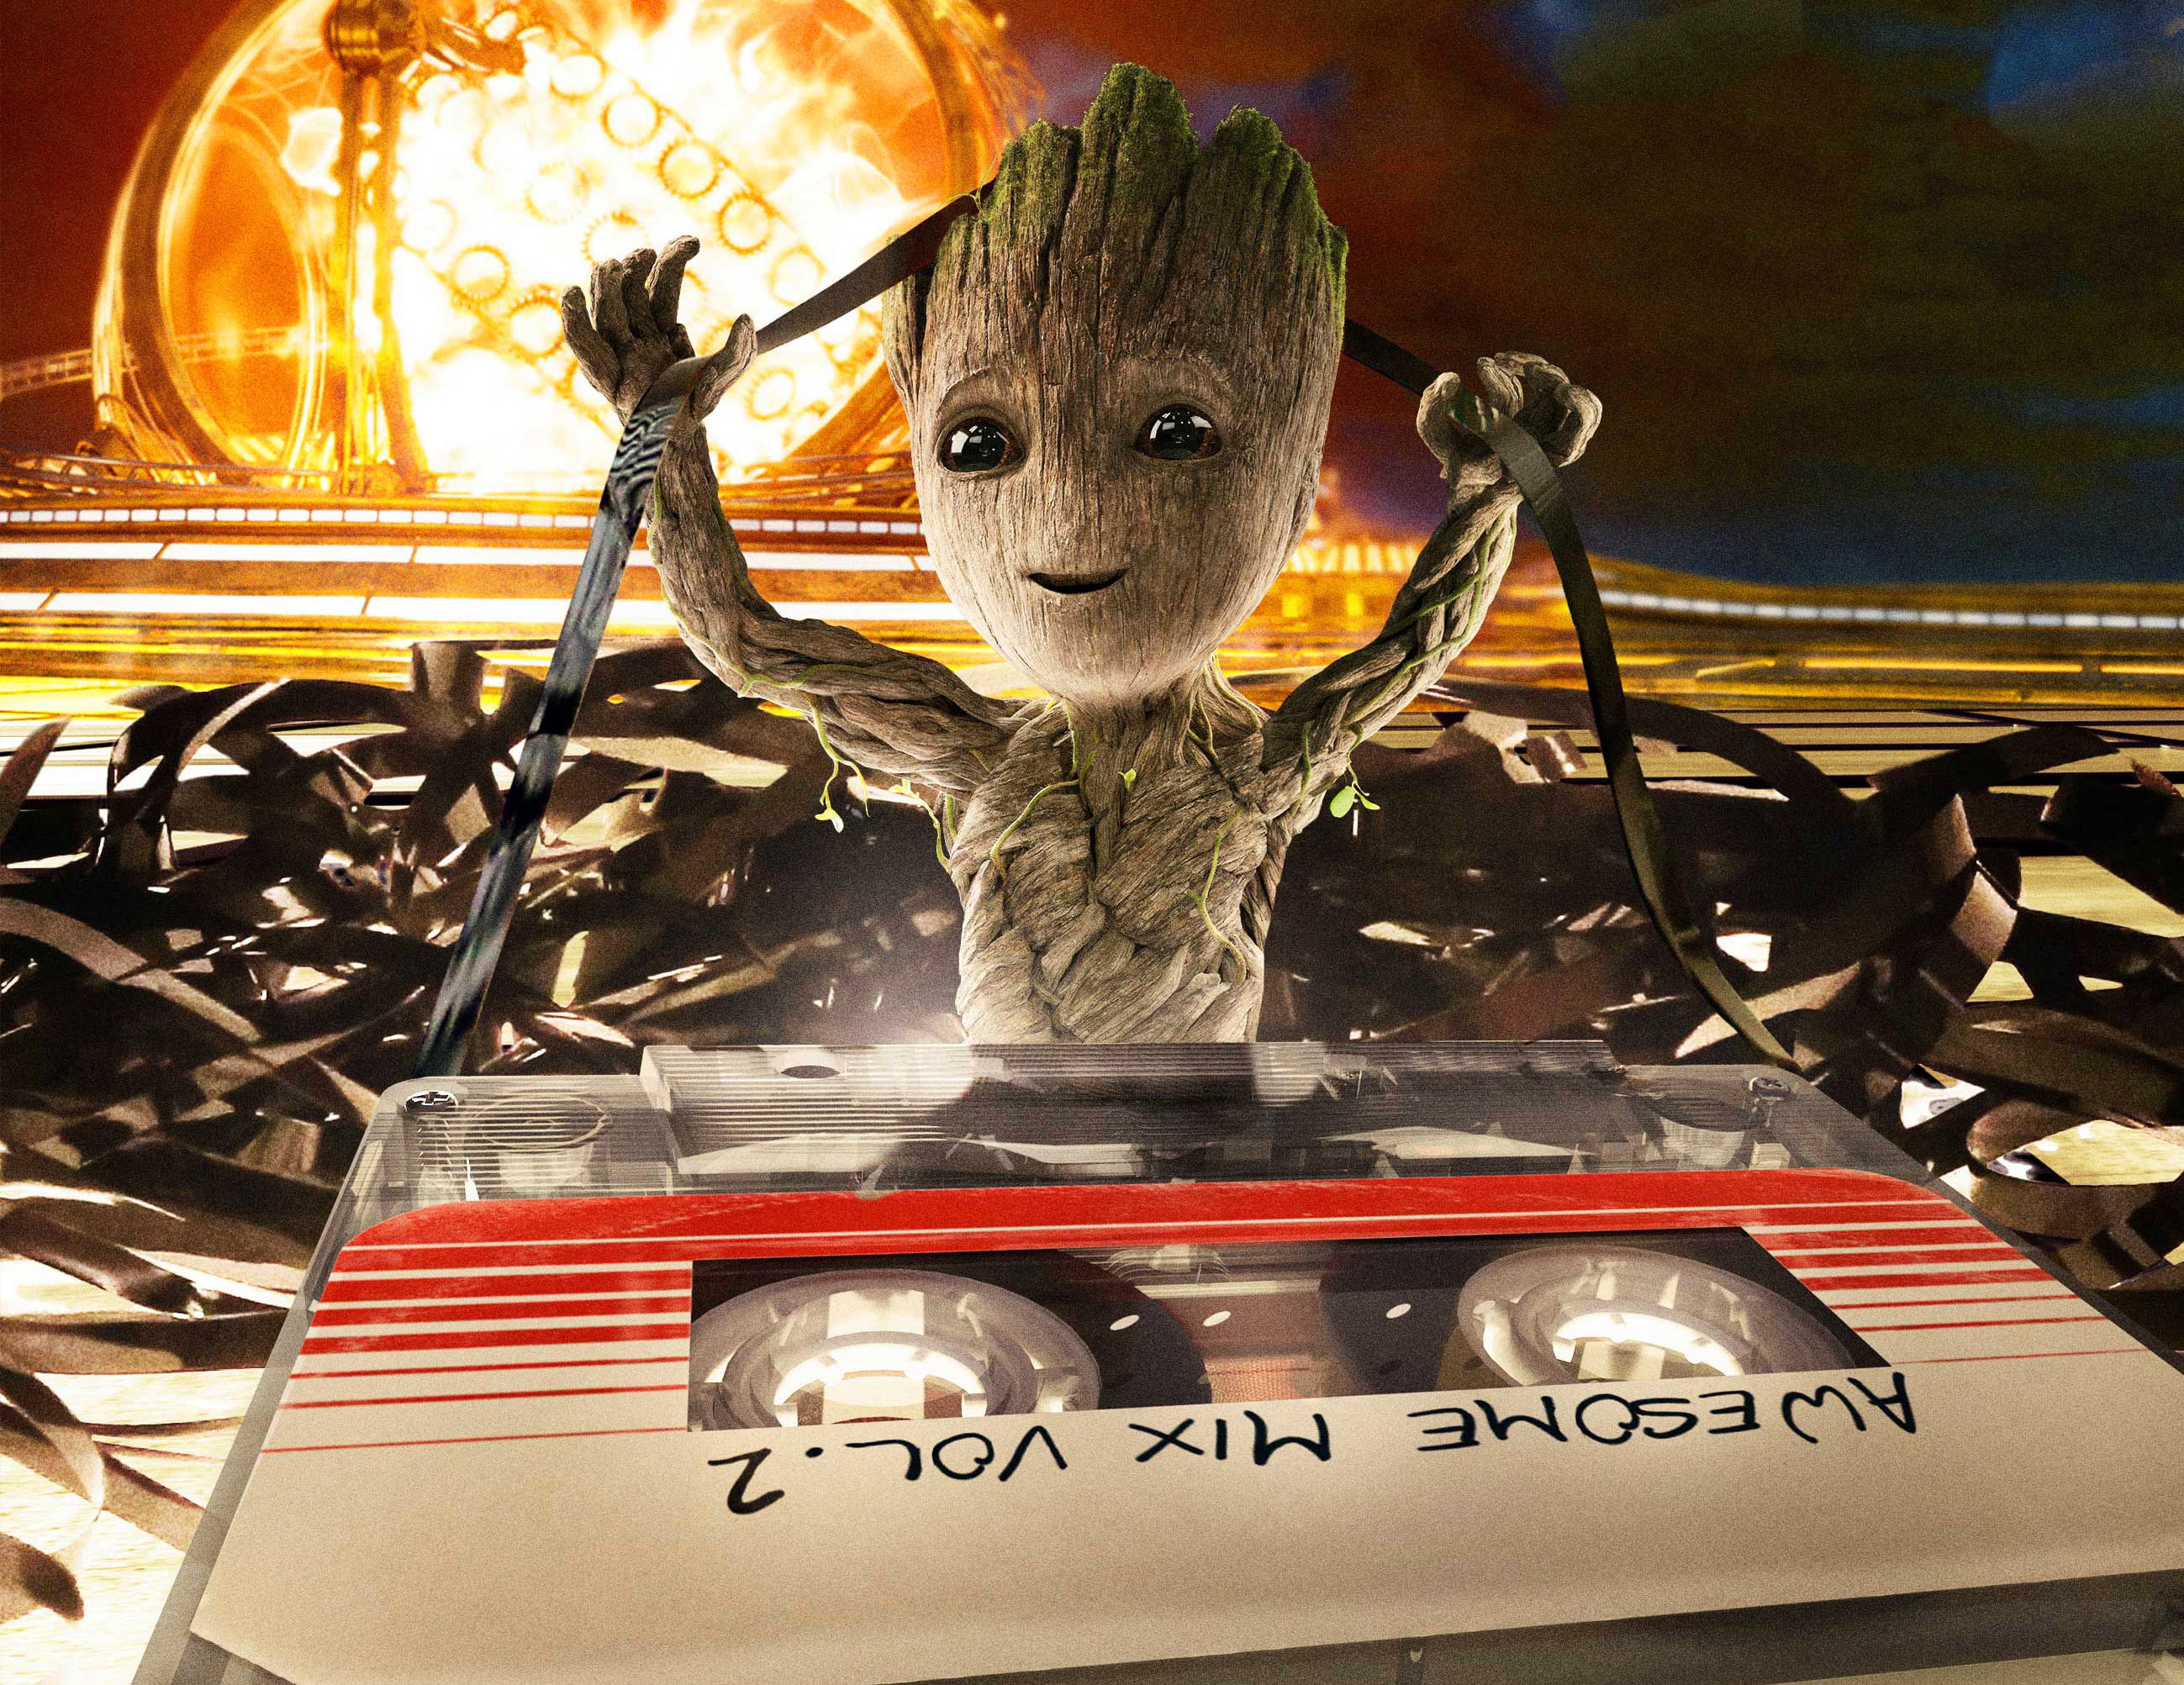 baby groot, guardians of the galaxy vol 2, movies, hd, animal